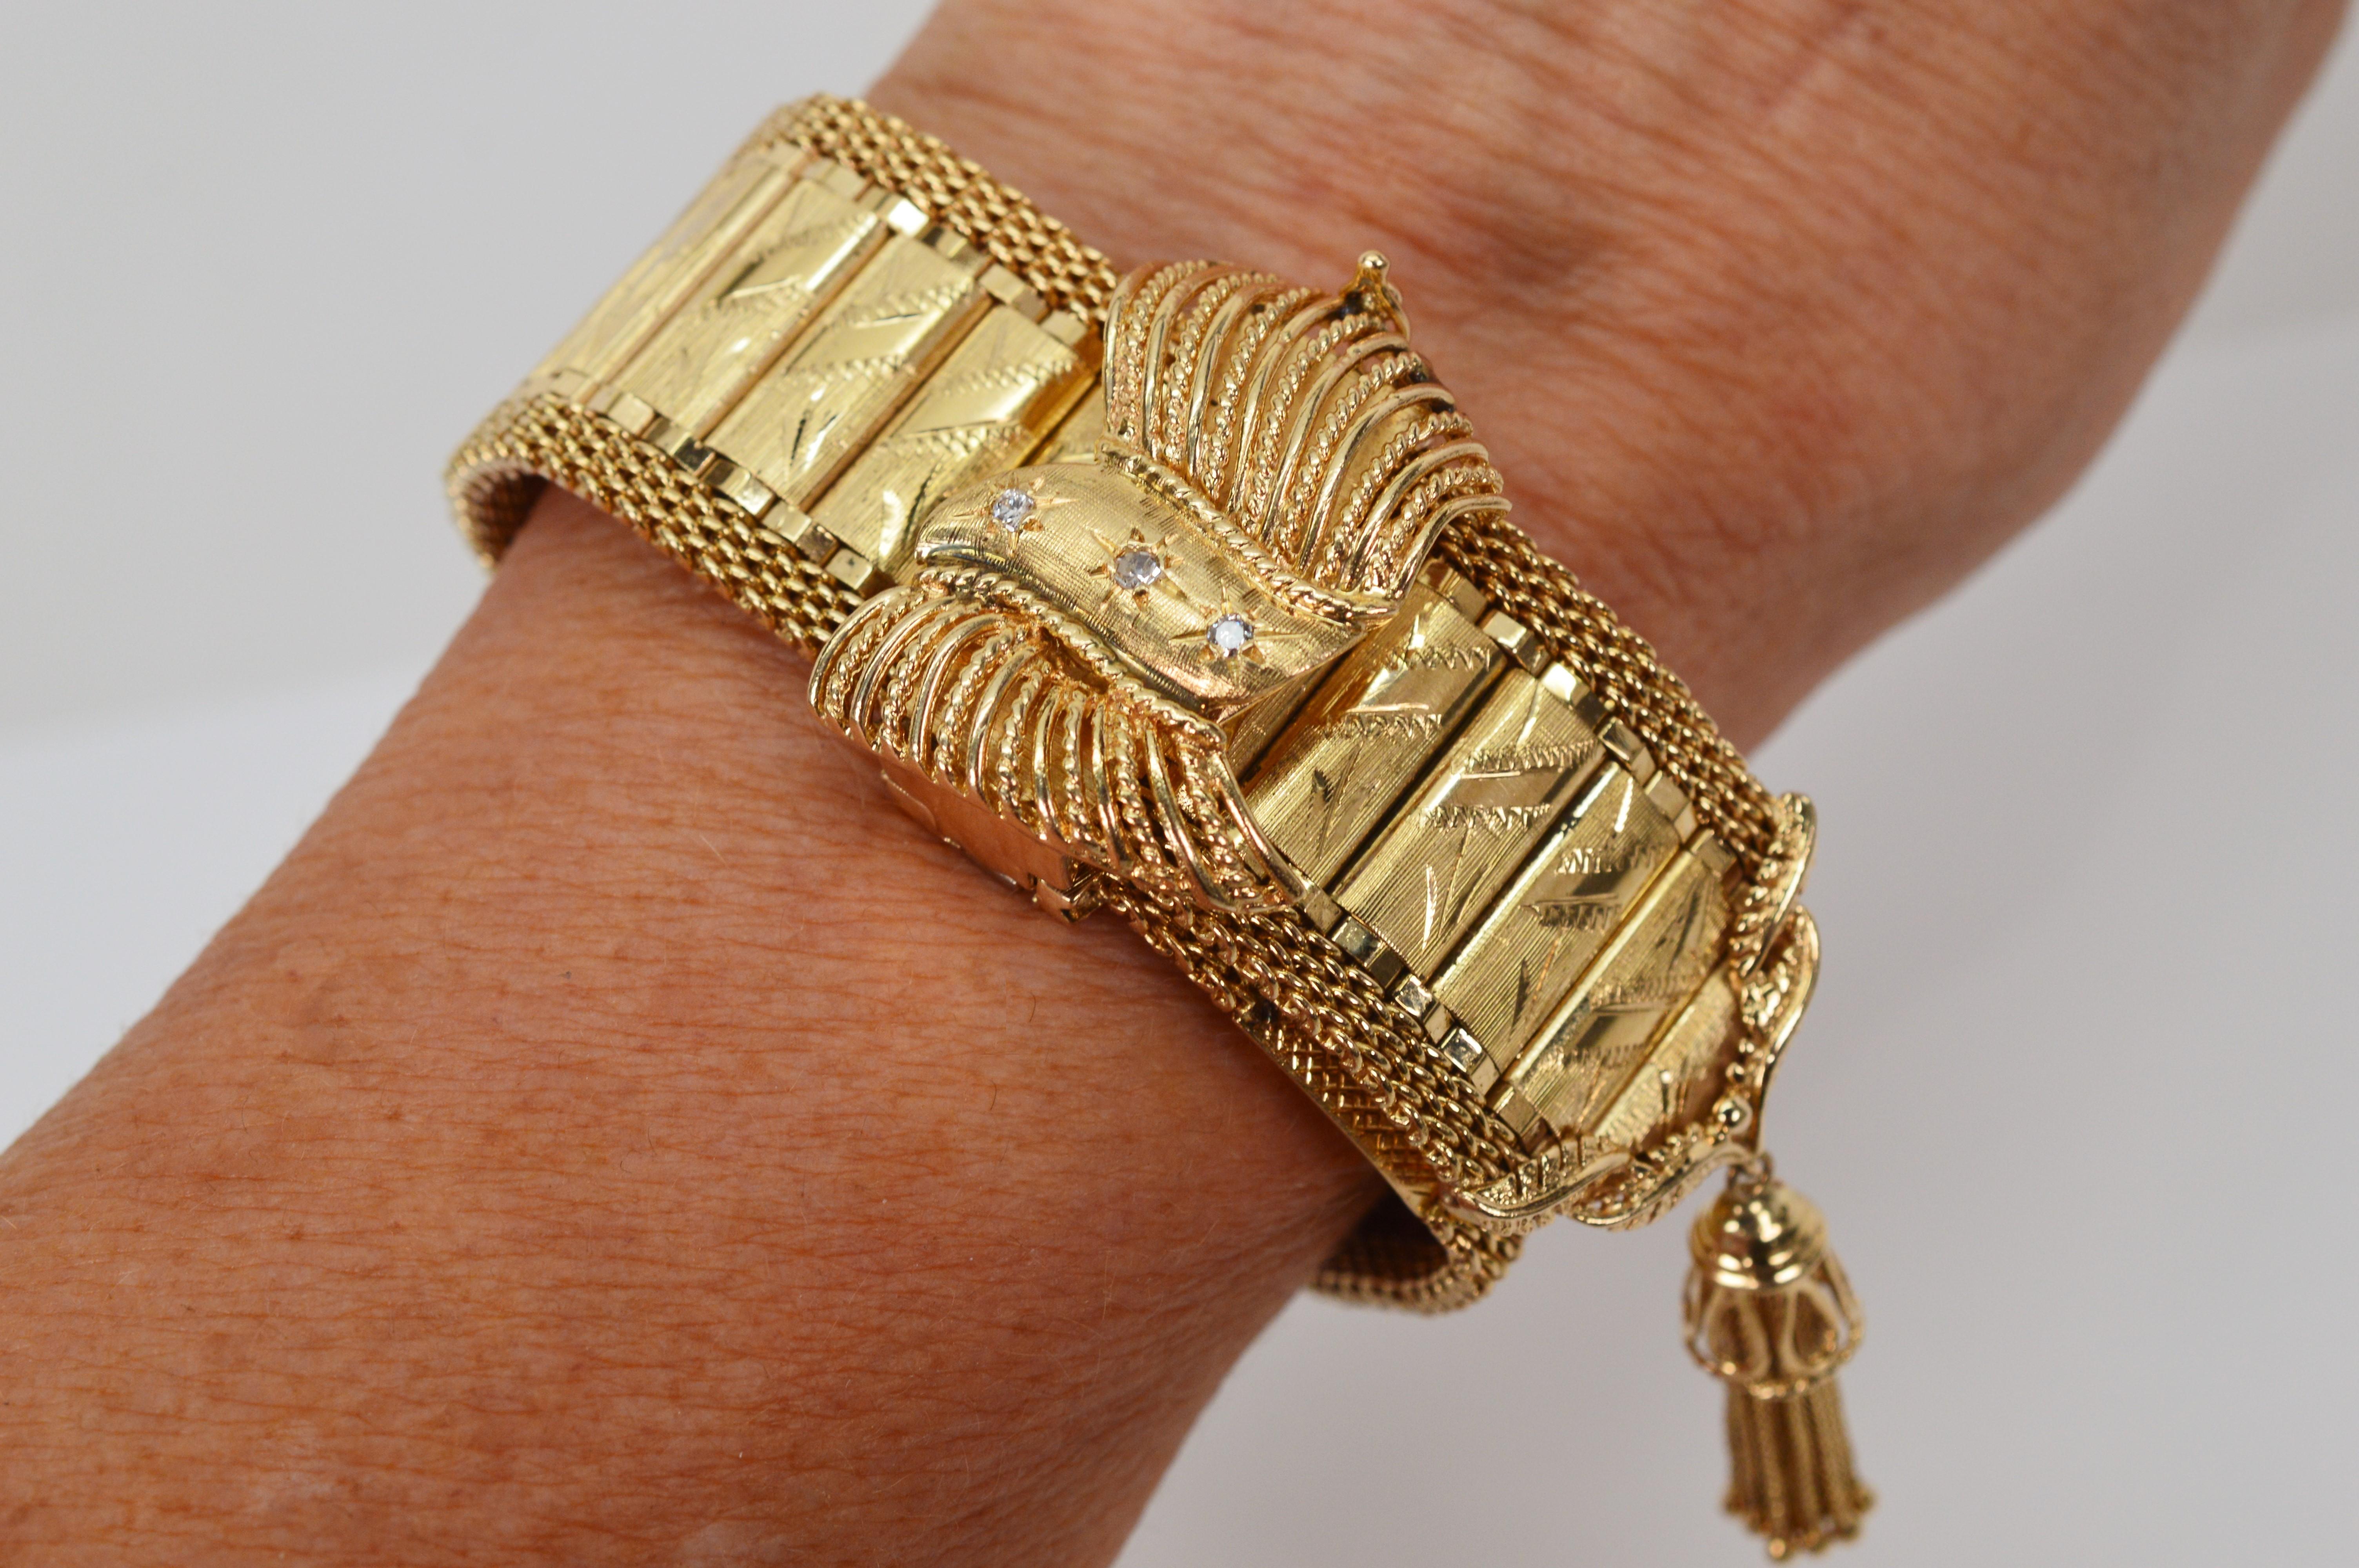 Victorian style appointments and a concealed timepiece give this gorgeous vintage 14 Karat Yellow Gold Wrap Style Bracelet  its stunning high style.
Framed with a rounded gold mesh detail along its generous 9 inch length, individual engraved gold